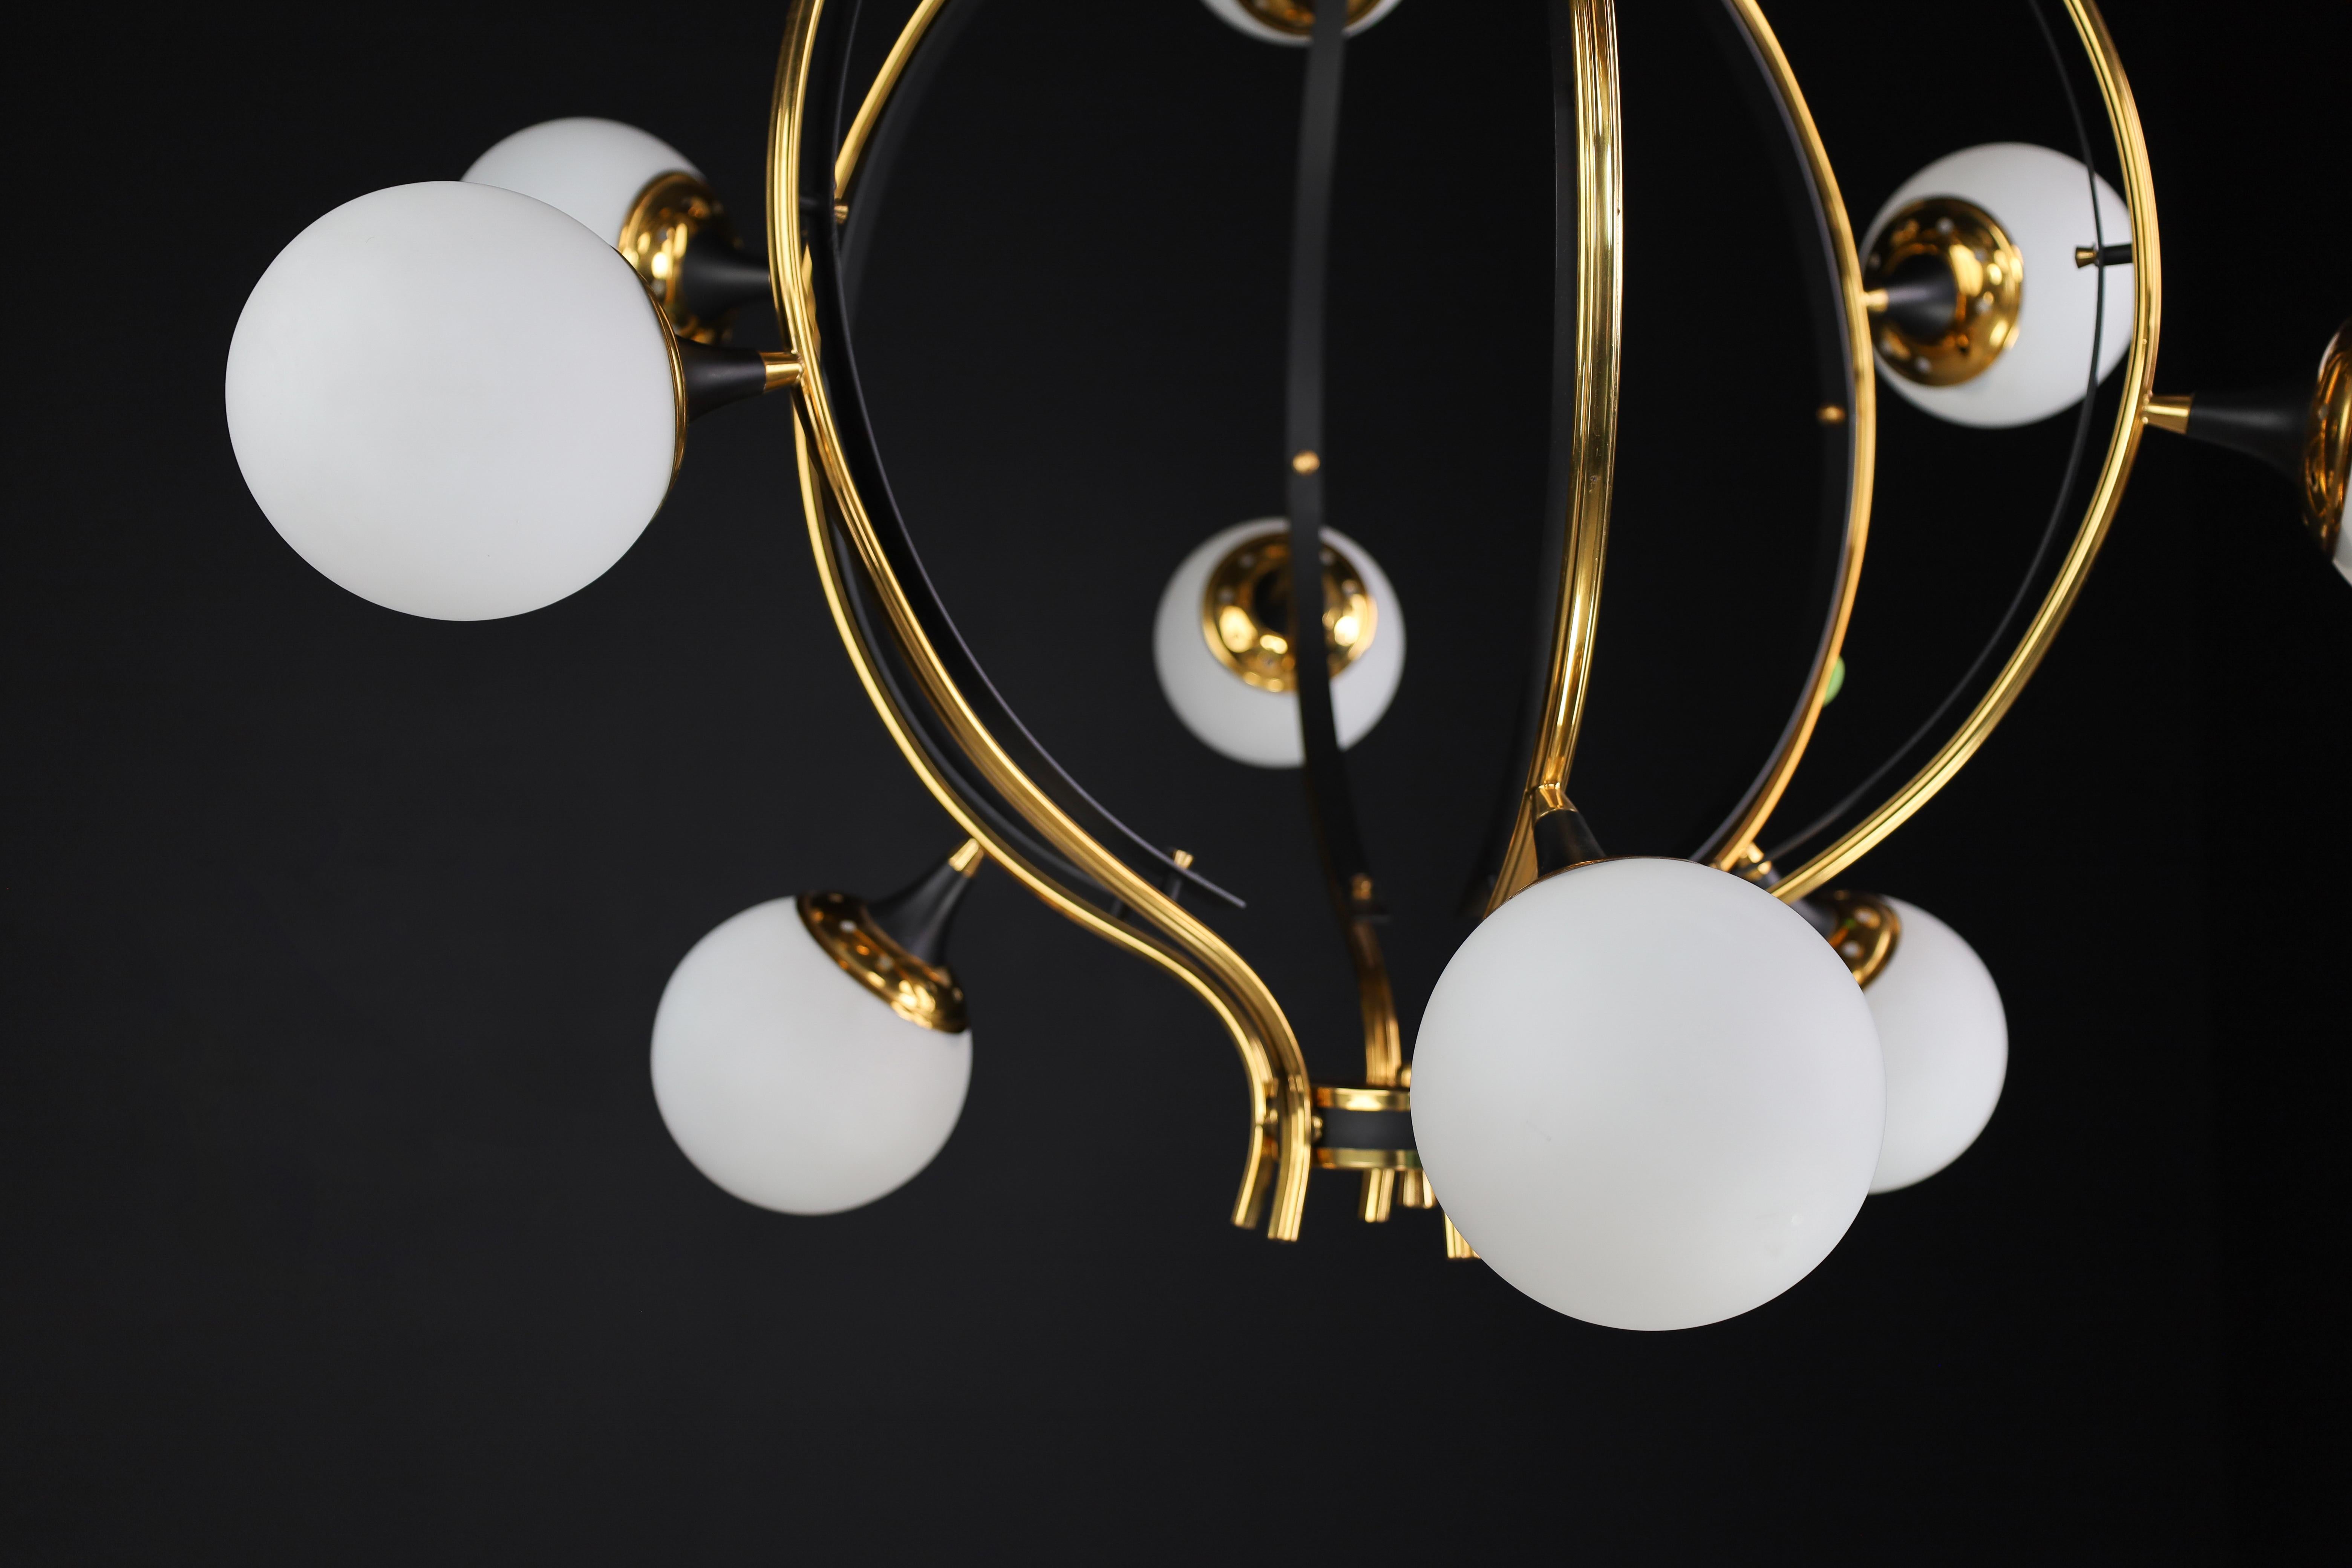 Midcentury Stilnovo Chandelier in Brass and 12 Opaline Globes, Italy 1950s For Sale 2